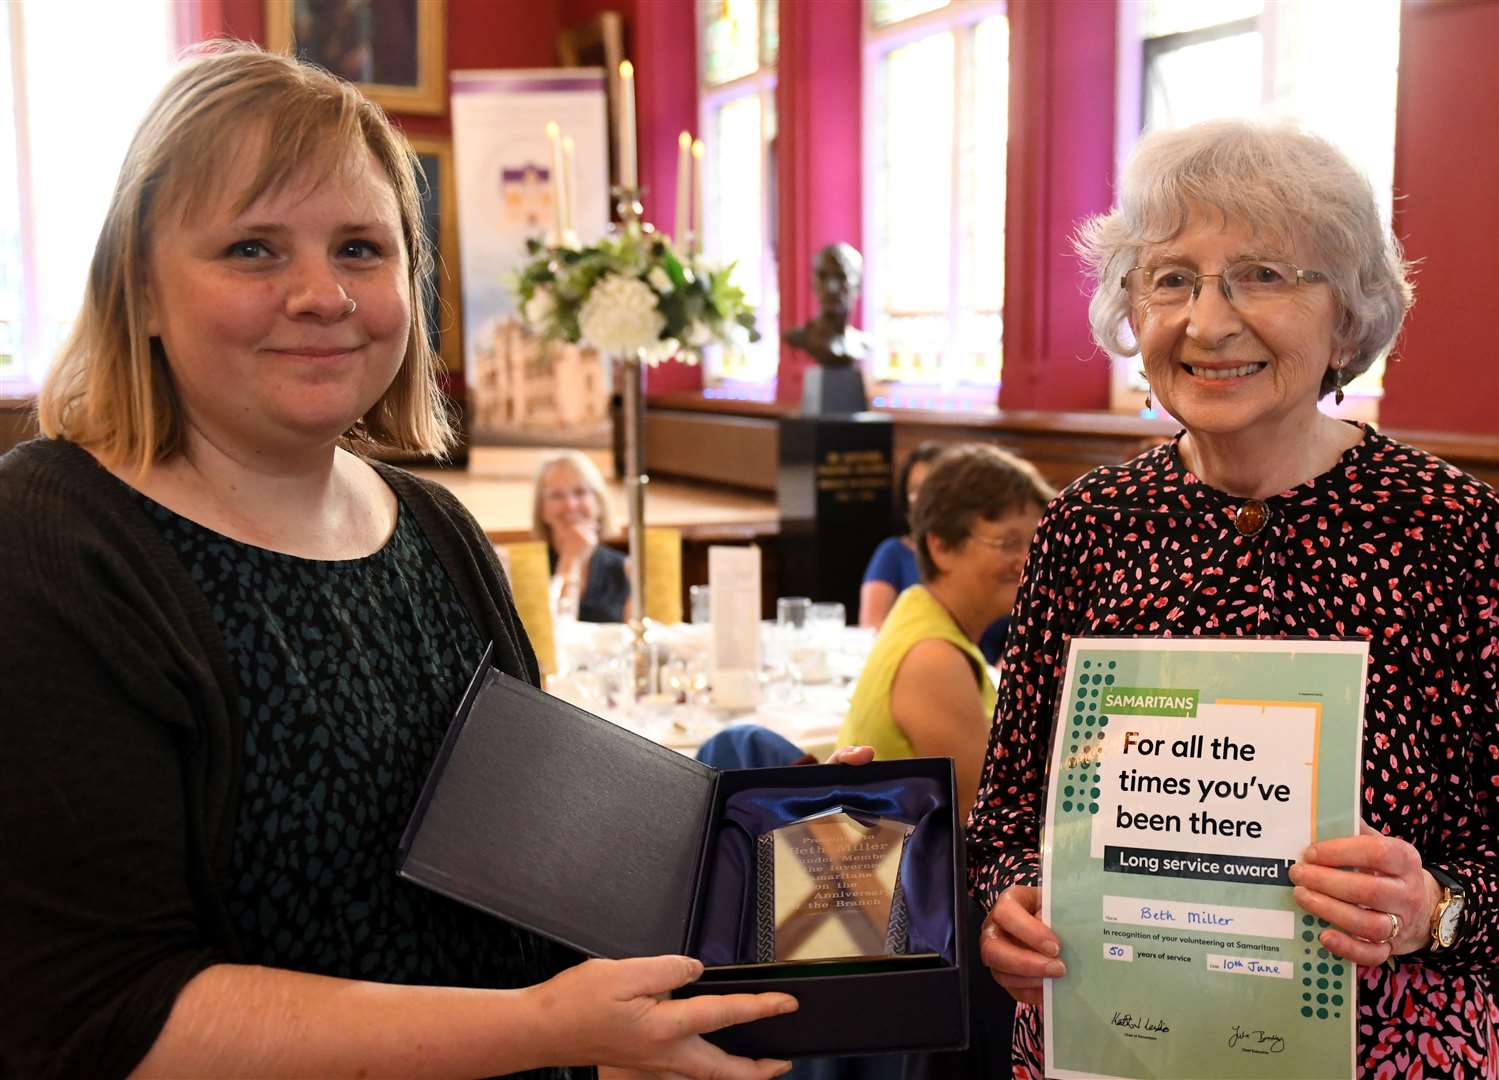 Rachael Thomas presenting a Long Service Award to Beth Miller. Picture: James Mackenzie.